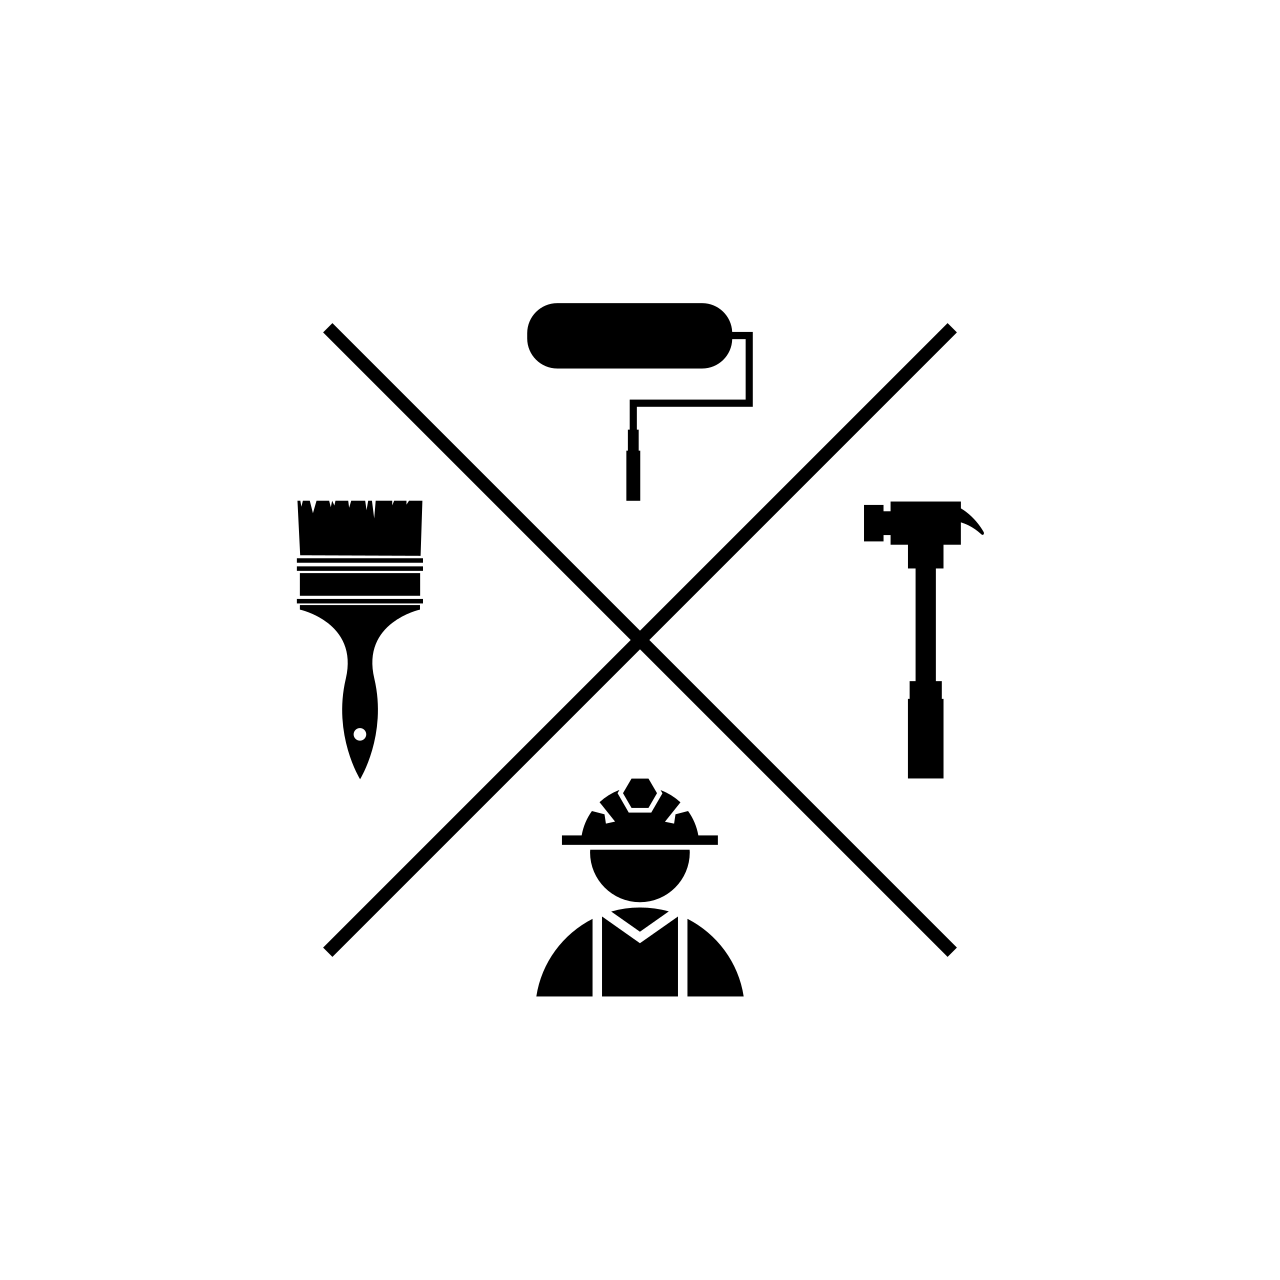 Home Repair Services's web page